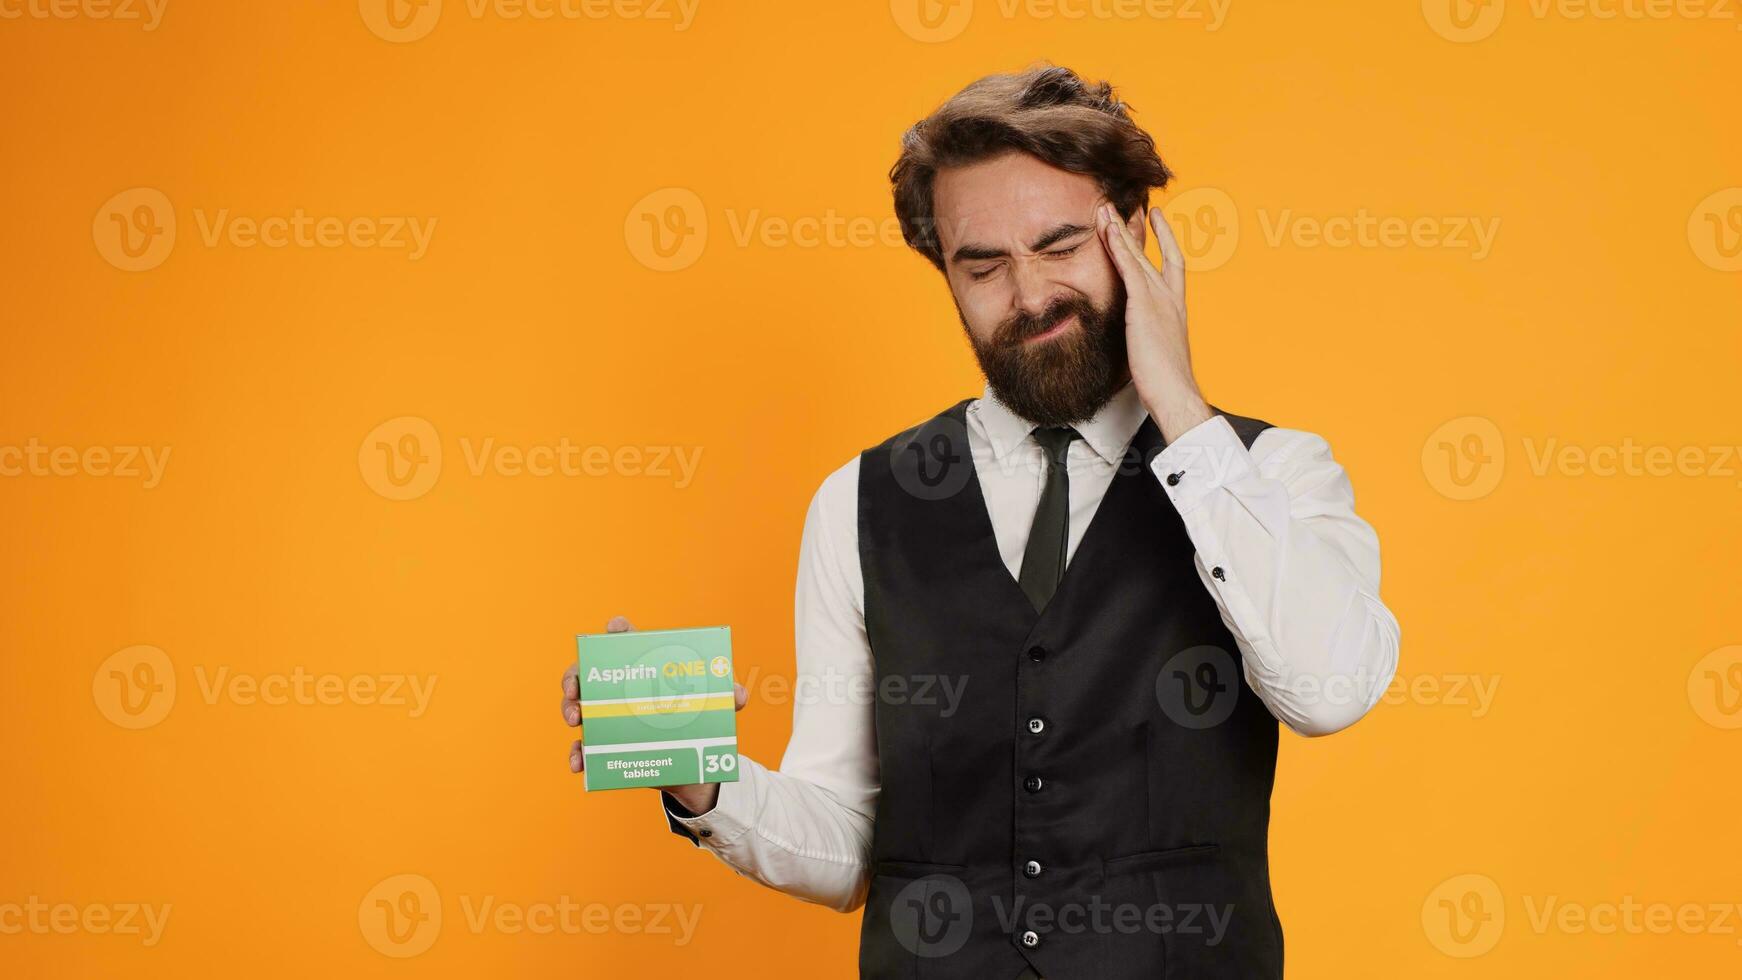 Classy waiter with headache recommends pills on camera, showcasing pack of painkillers to ease pain. Young professional worker feeling unwell and ill, holding medicine treatment box. photo